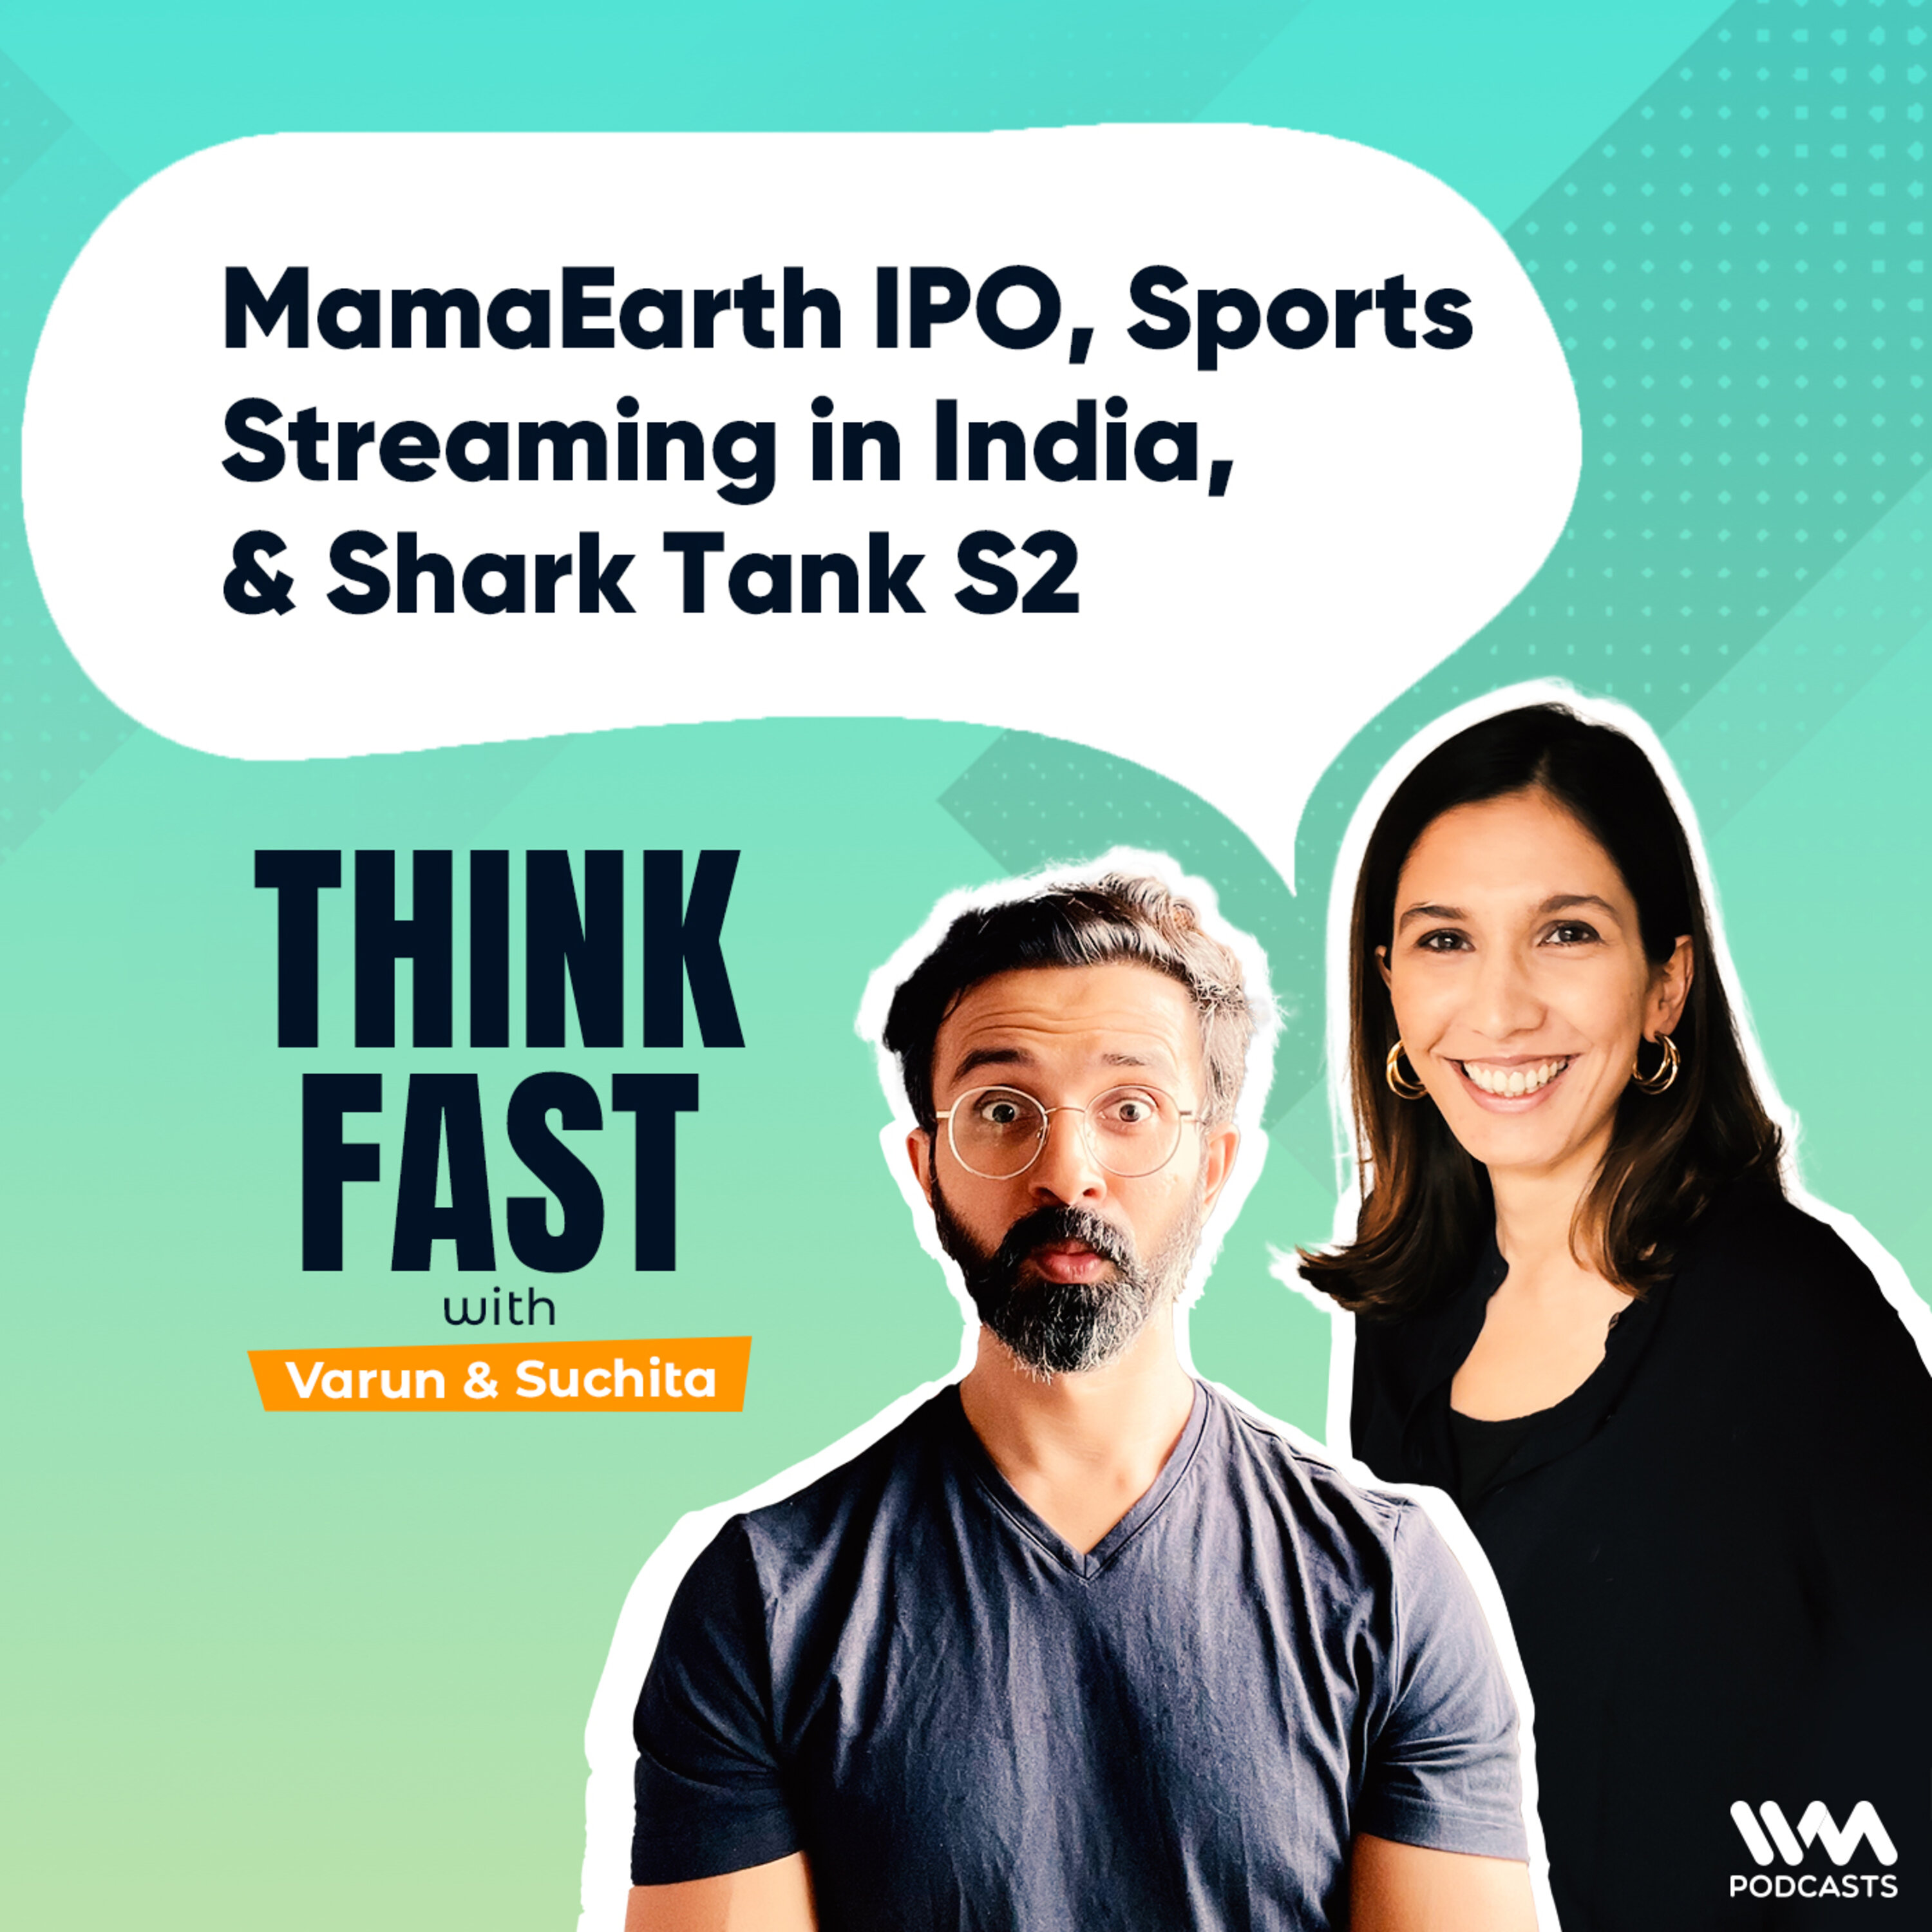 MamaEarth IPO, Sports Streaming in India, & Shark Tank S2